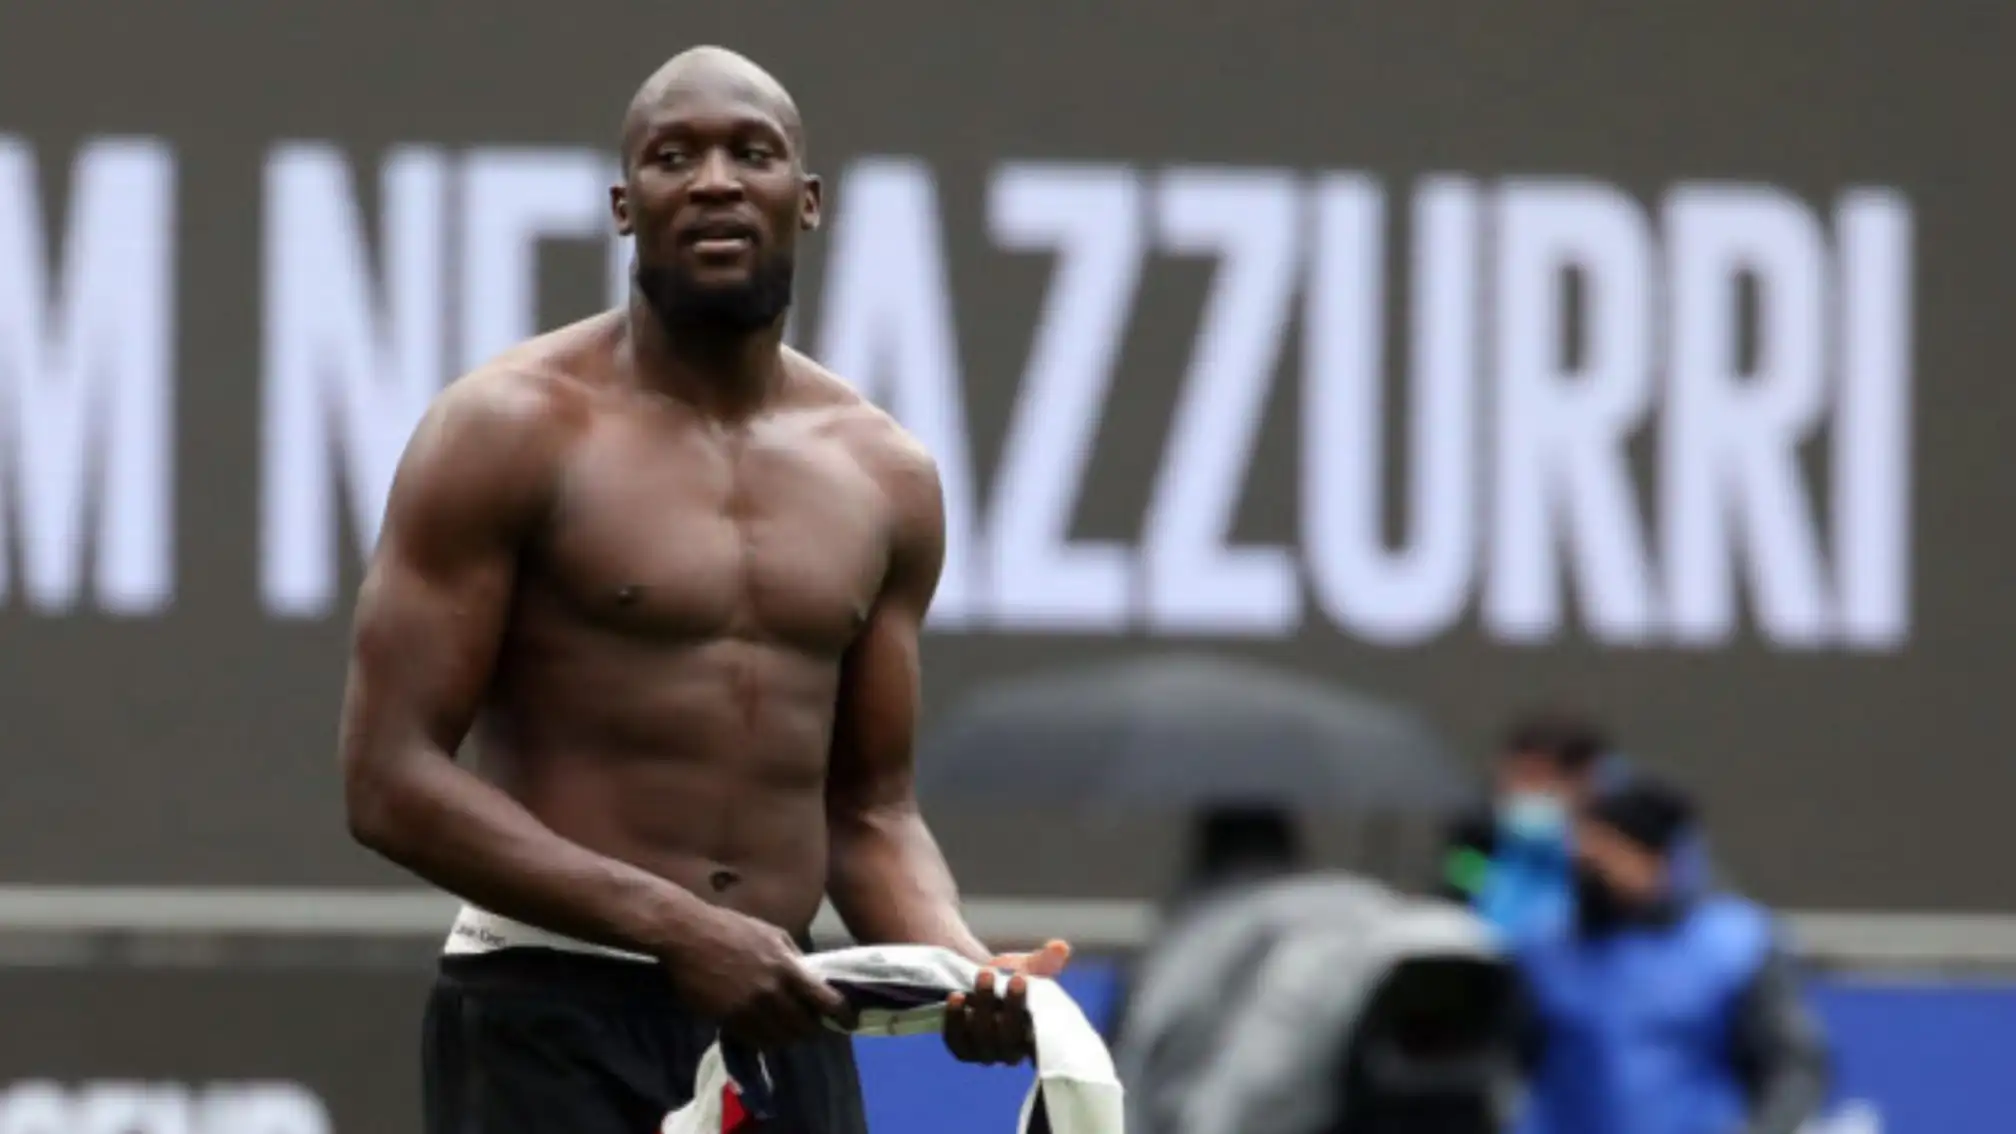 Lukaku is killing his own confidence: Former Chelsea man gives damning verdict of €100 million man